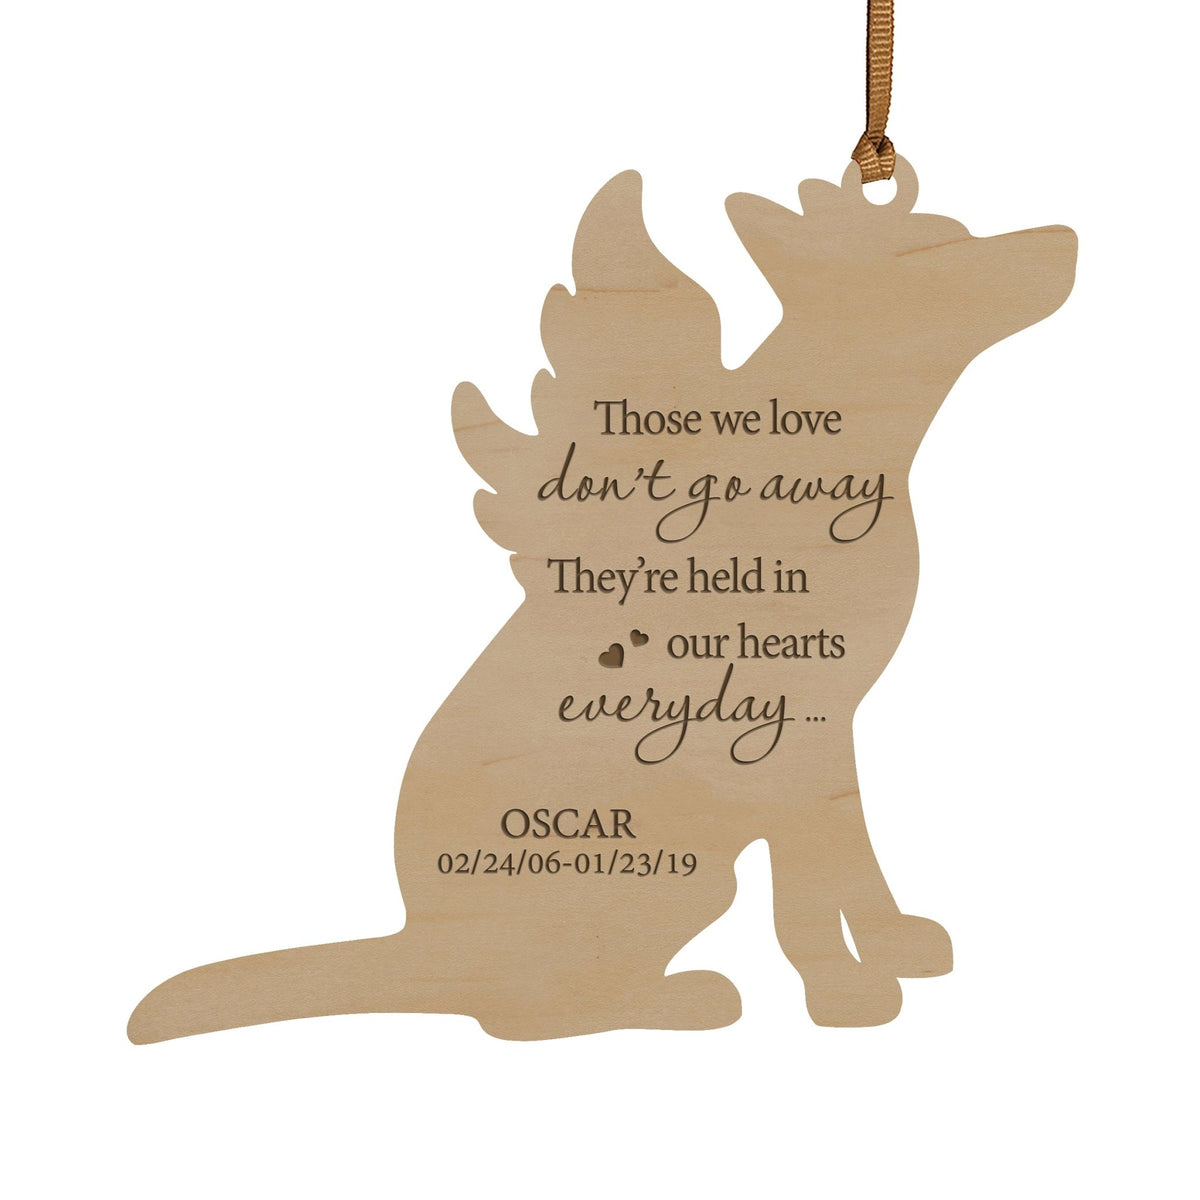 Personalized Engraved Memorial Dog Ornament 4.9375” x 5.375” x 0.125” - Those we love don’t go away (HEARTS) - LifeSong Milestones